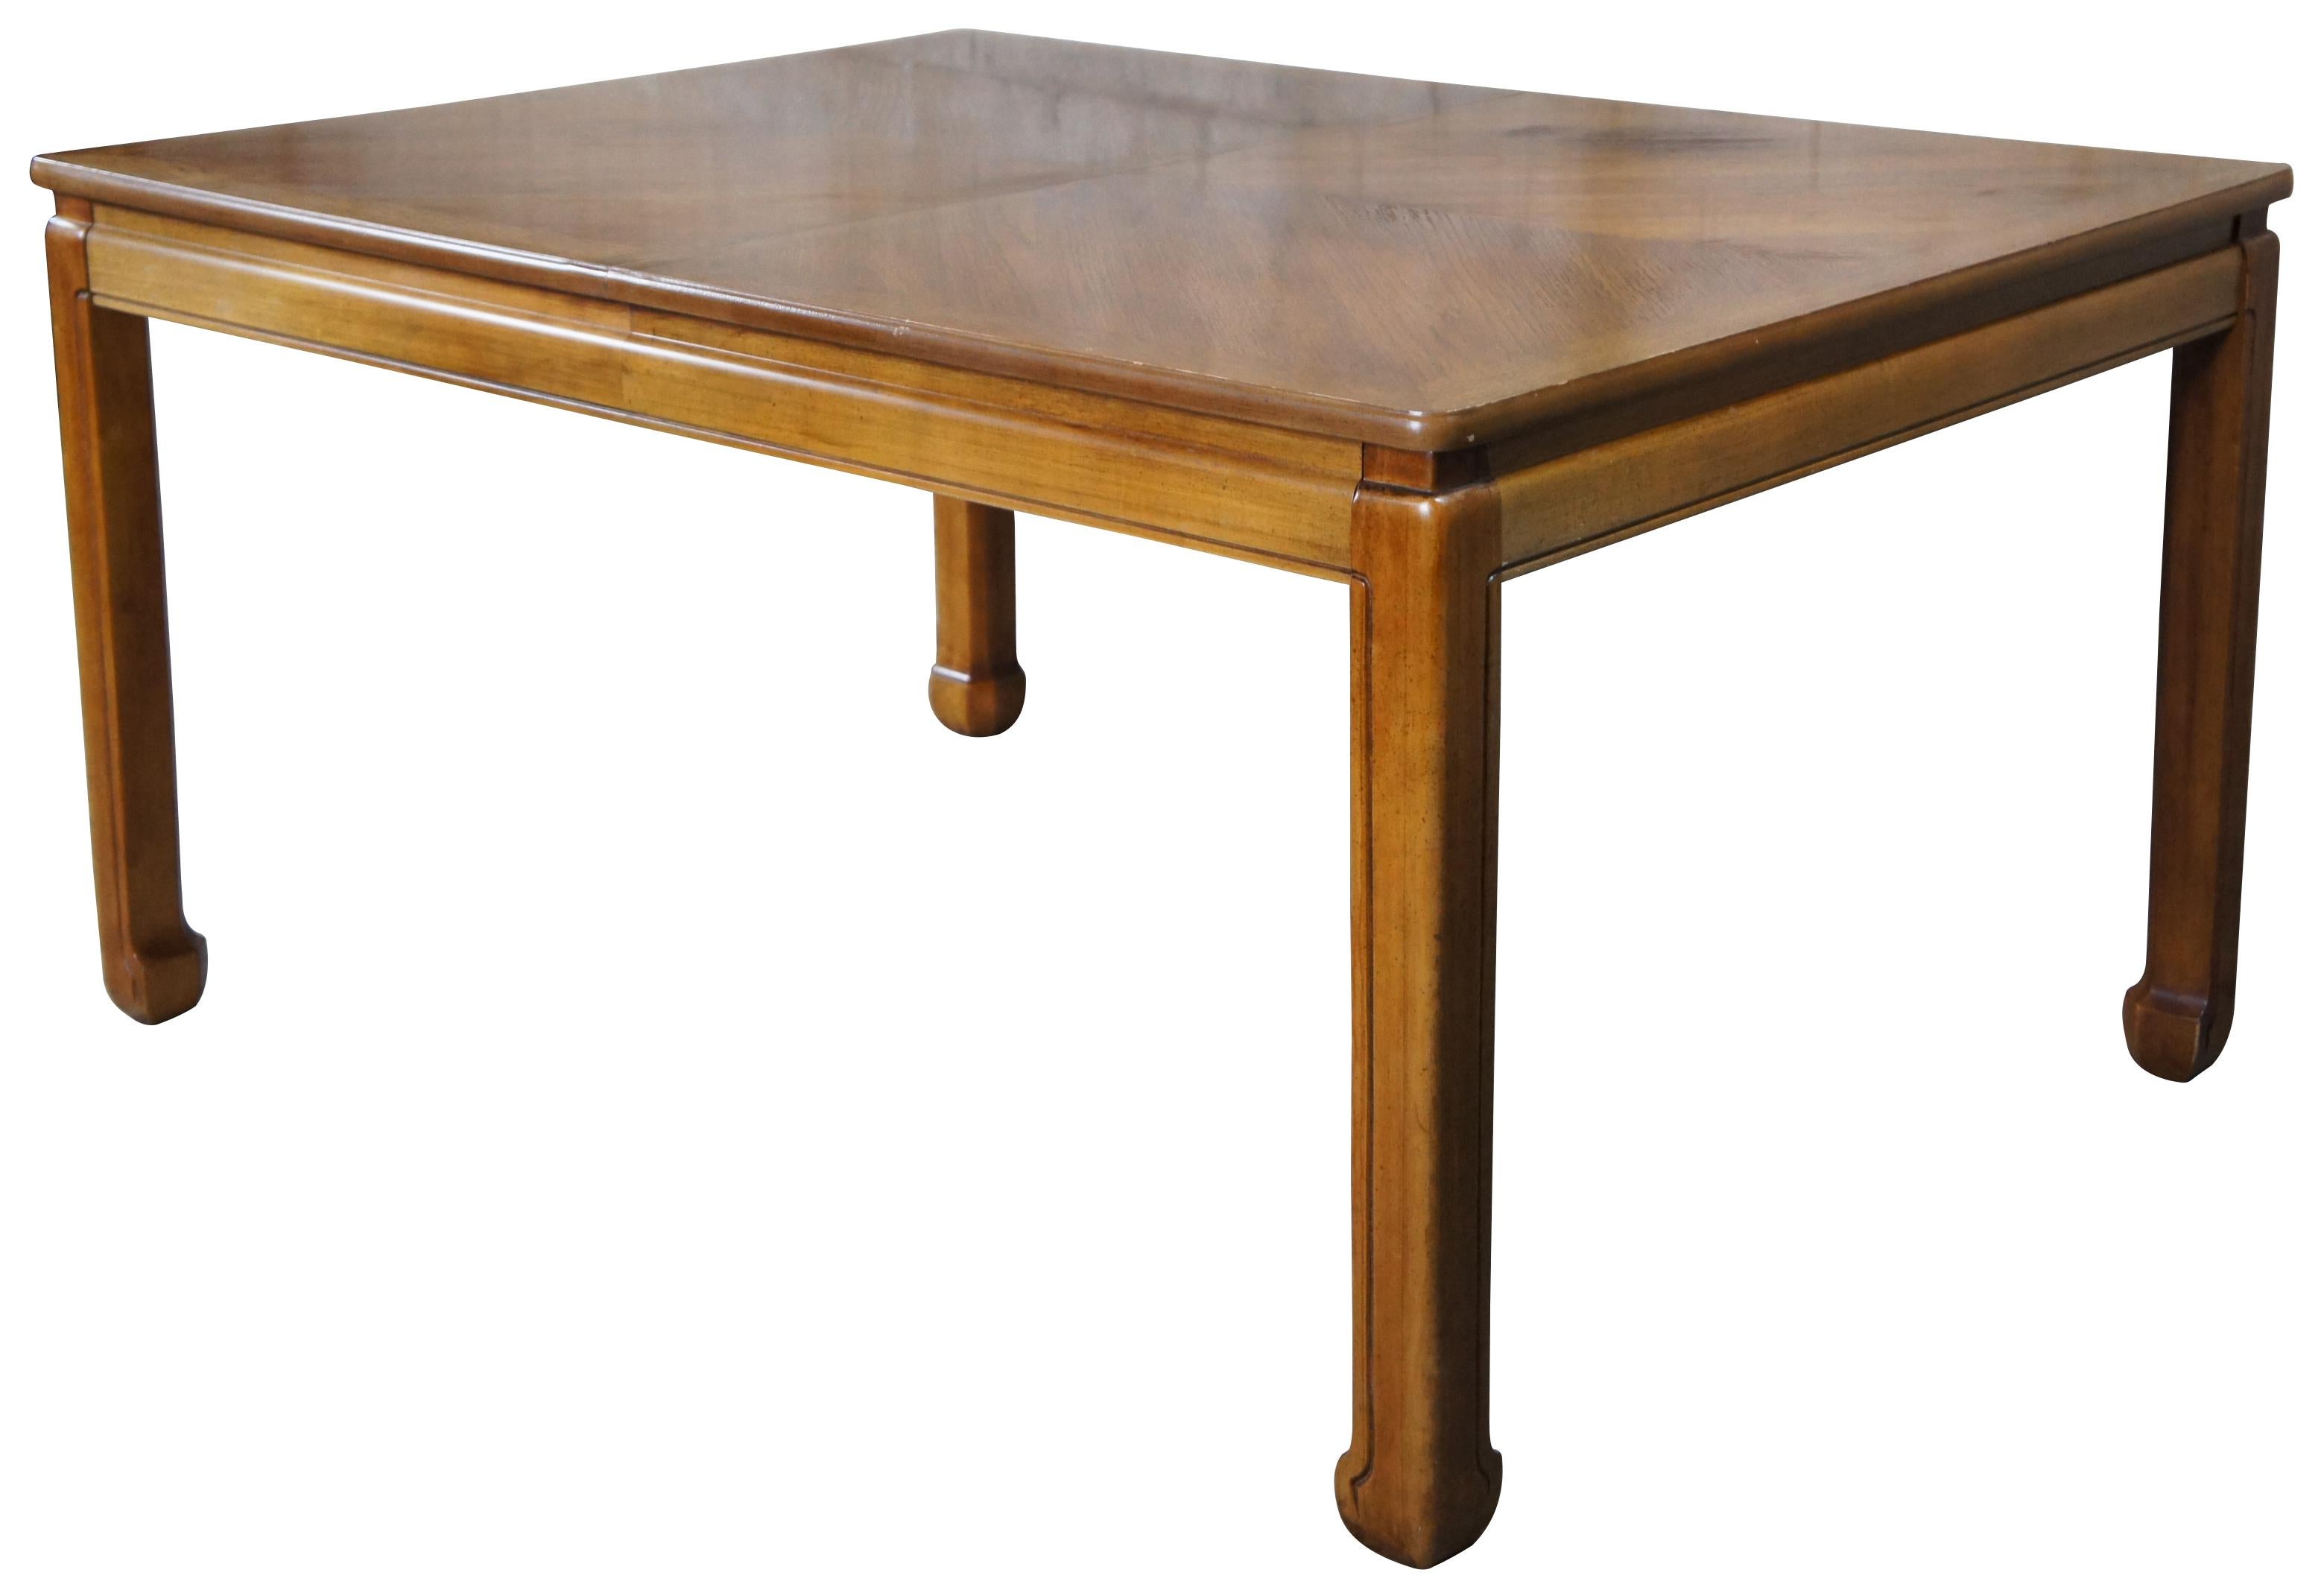 Stanley furniture dining table, circa last quarter 20th century. Features a rectangular form with matchbook oak top and ming inspired feet.

Measures: 42